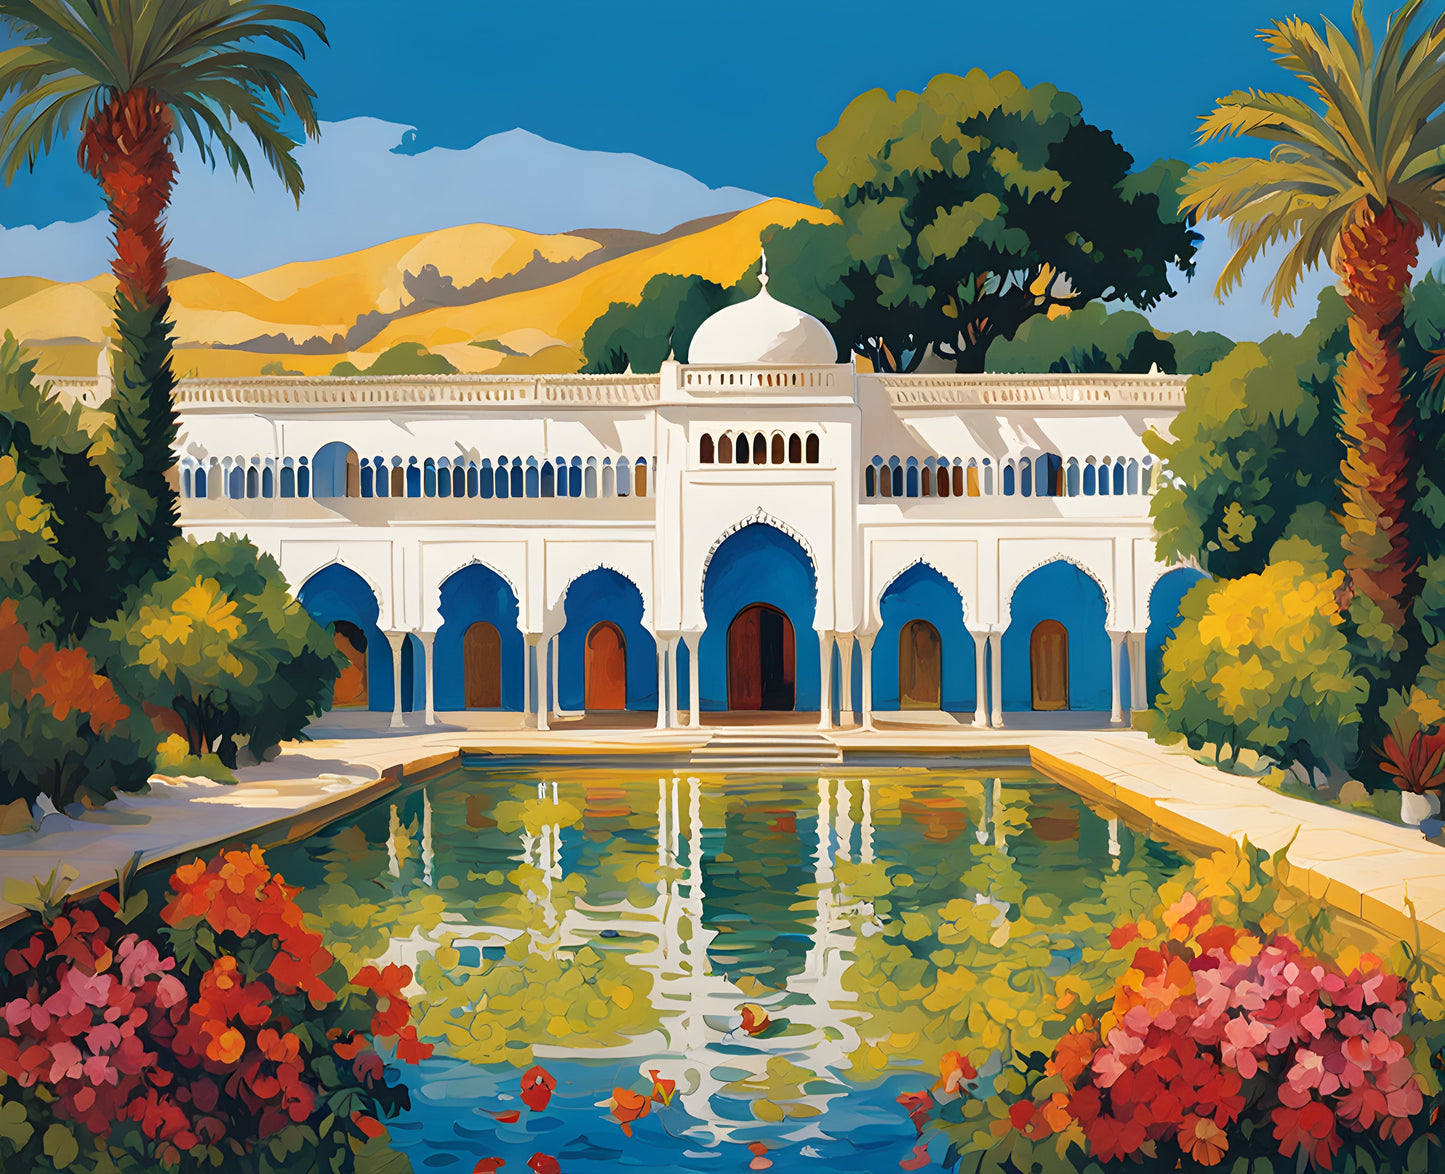 Morocco Collection PD (102) - Bahia Palace, Marrakesh - Van-Go Paint-By-Number Kit